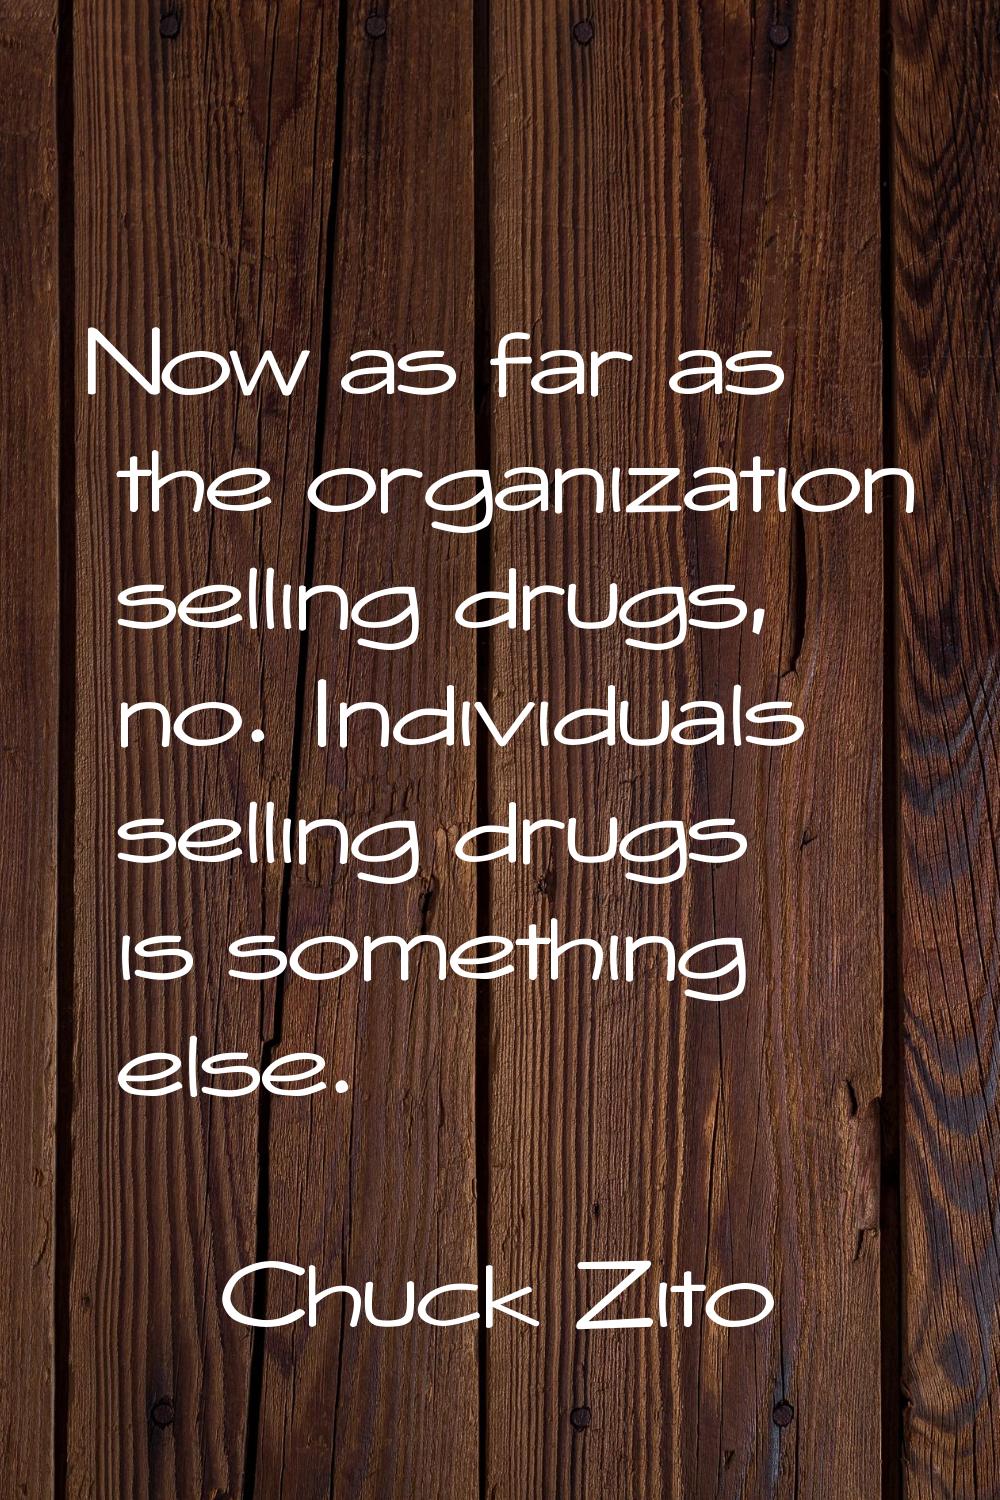 Now as far as the organization selling drugs, no. Individuals selling drugs is something else.